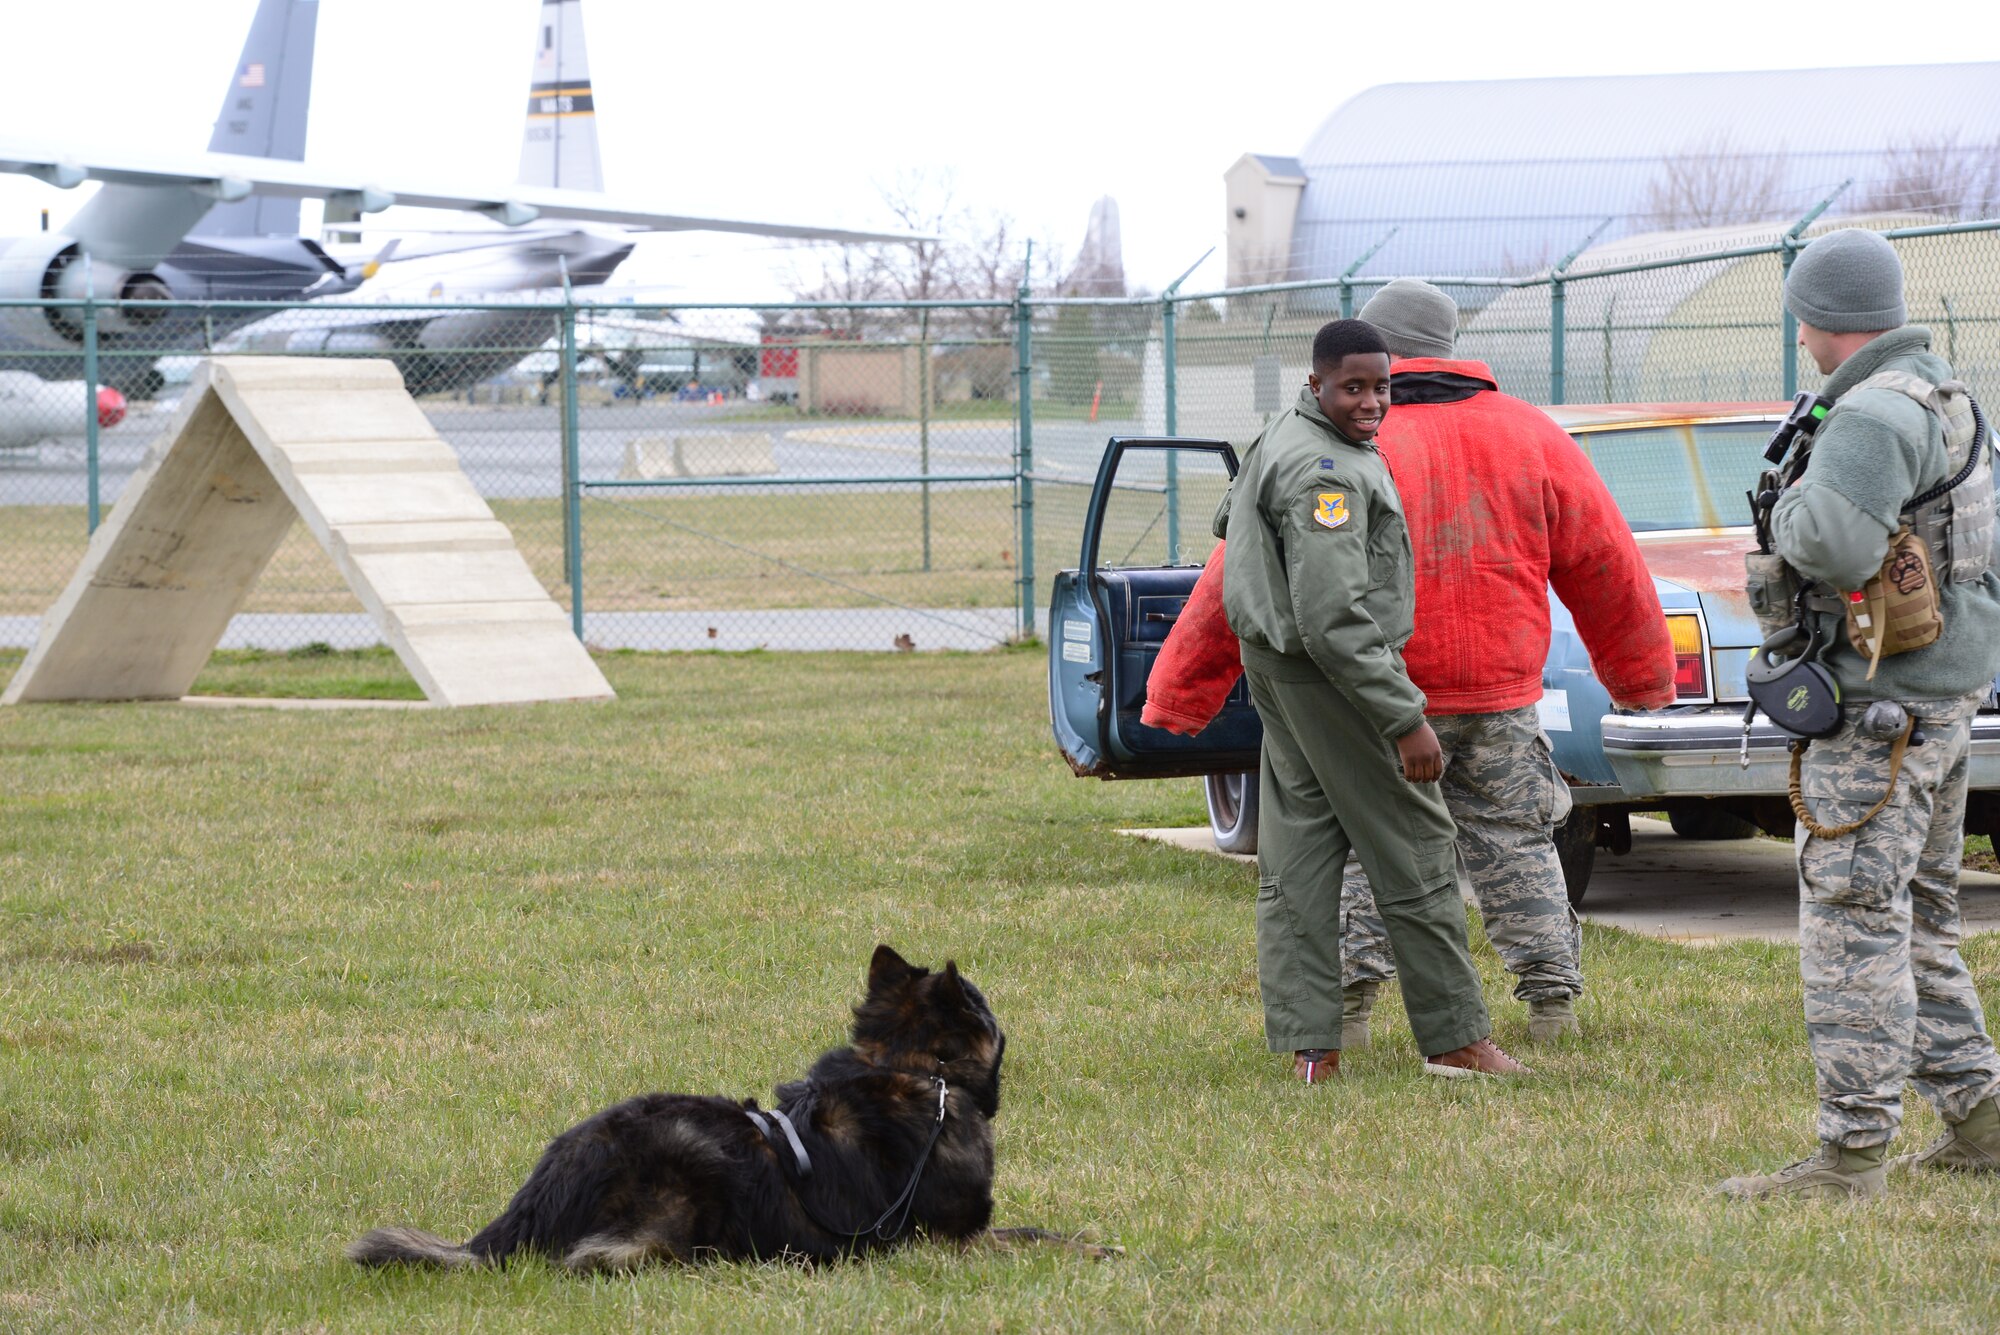 Kareem Bennett searches a suspect during a military working dog demonstration March 16, 2018, at Dover Air Force Base, Del. Bennett, a guest of the 3rd Airlift Squadron, was invited to take part in an all-day personalized tour of the installation. (U.S. Air Force photo by Staff Sgt. Aaron J. Jenne)